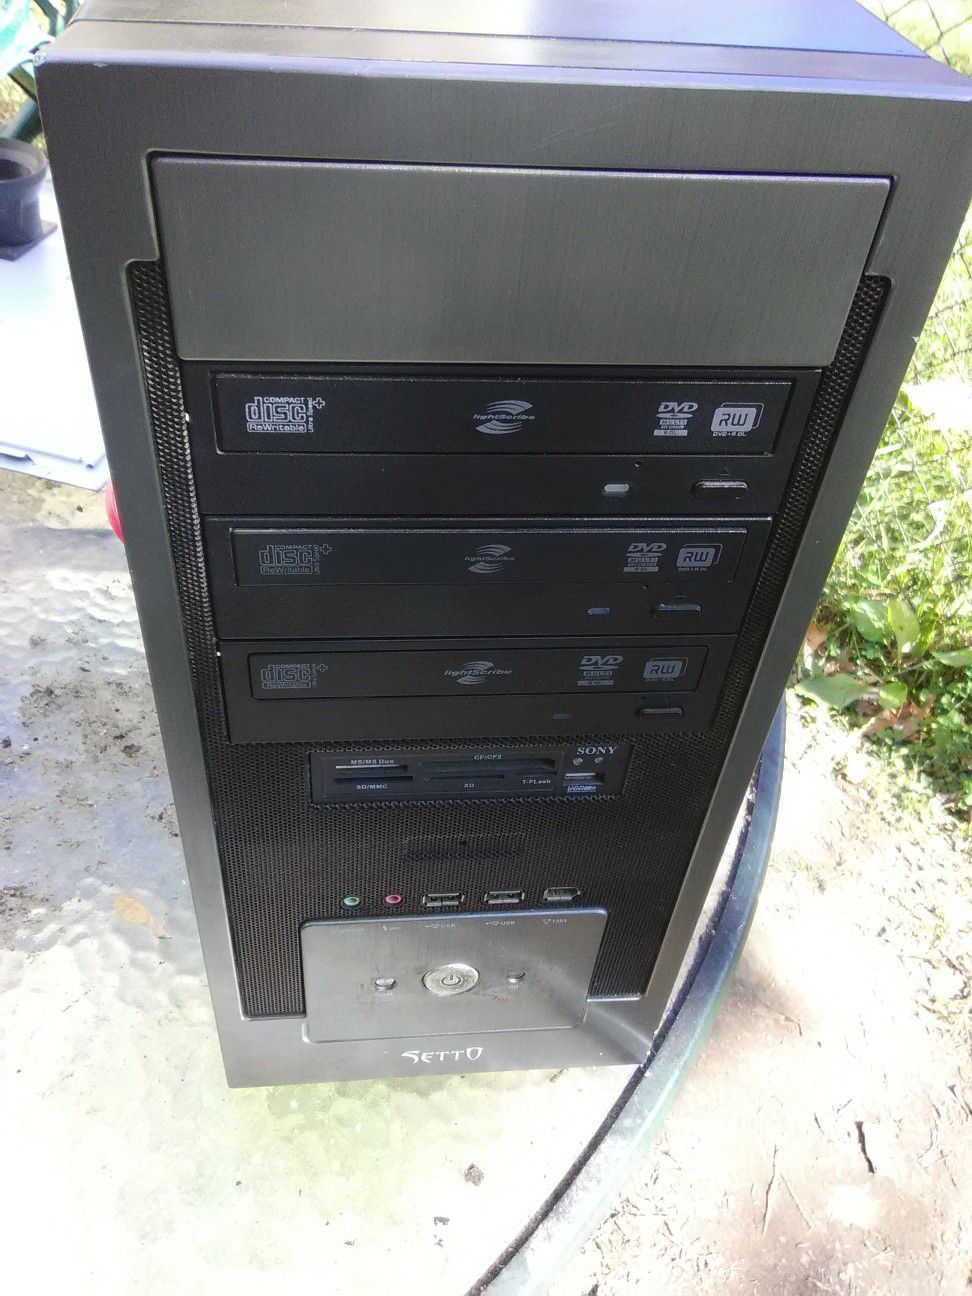 Setto PC gaming computer case with motherboard i5 processors